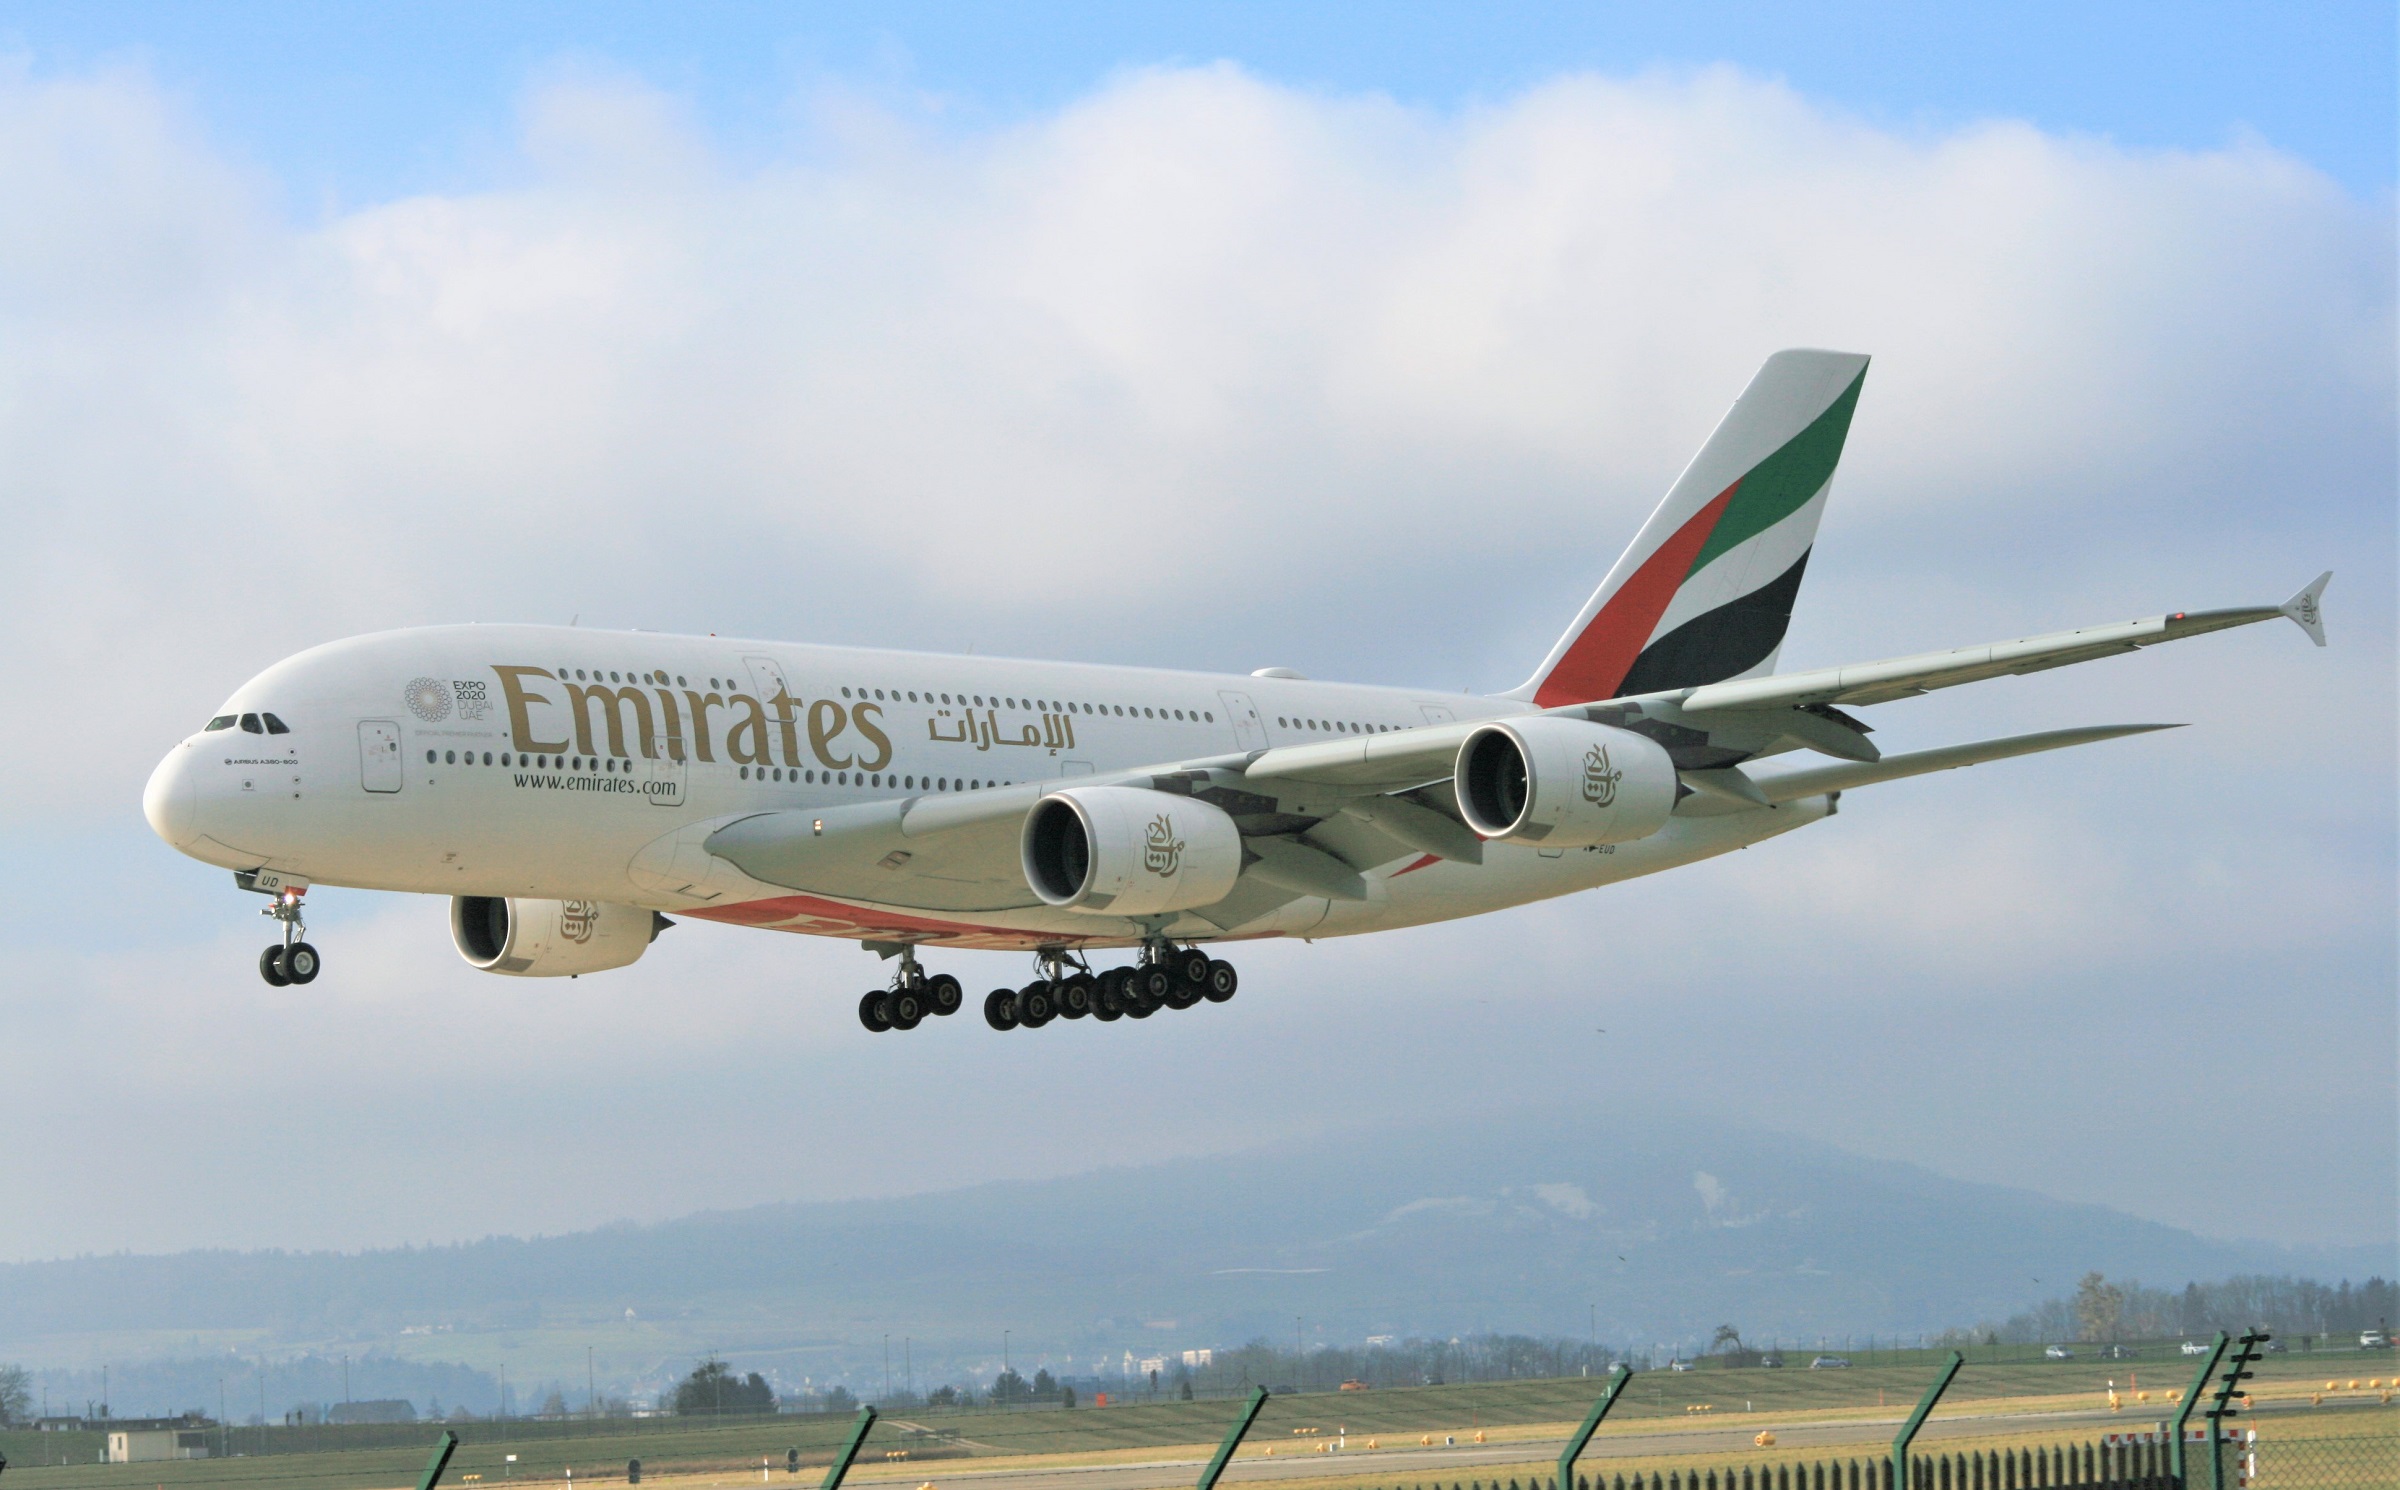 Heathrow Airport and Emirates Come to an Agreement